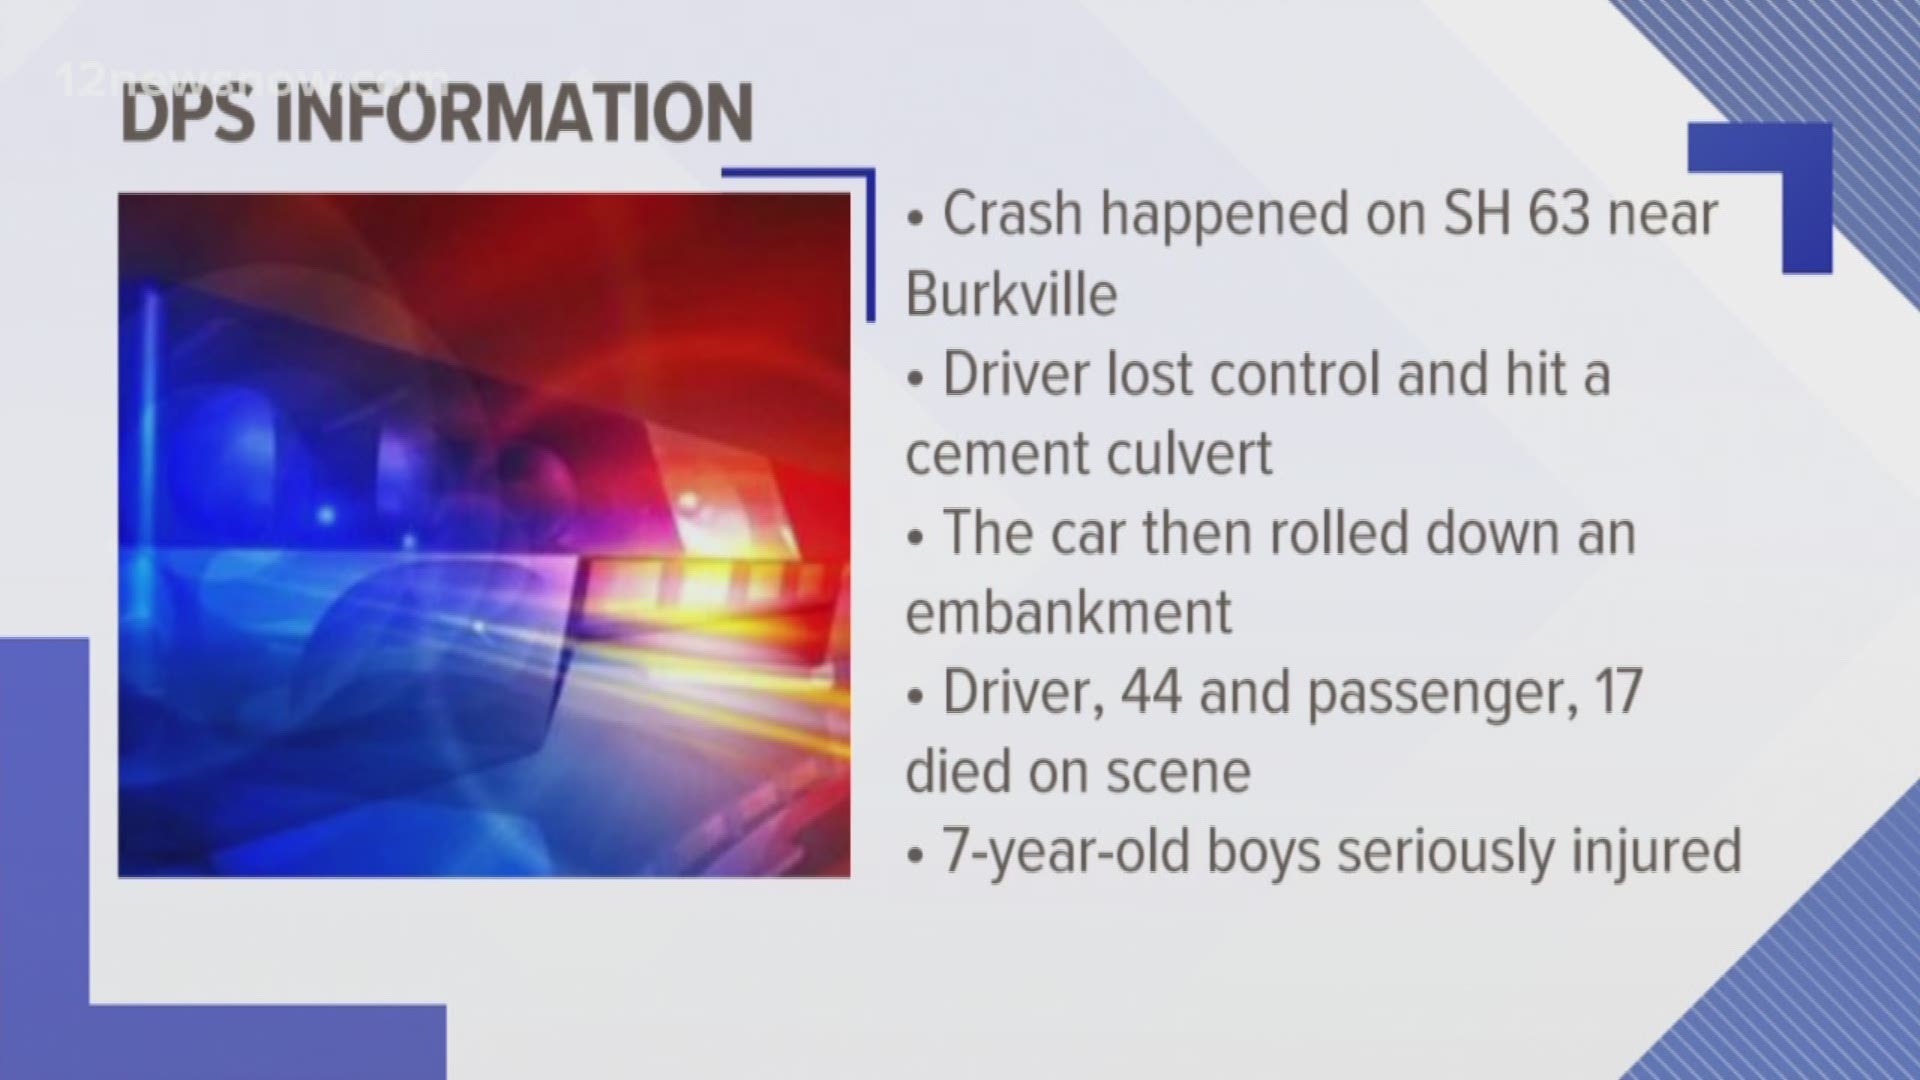 Two 7-year-old boys were seriously injured.